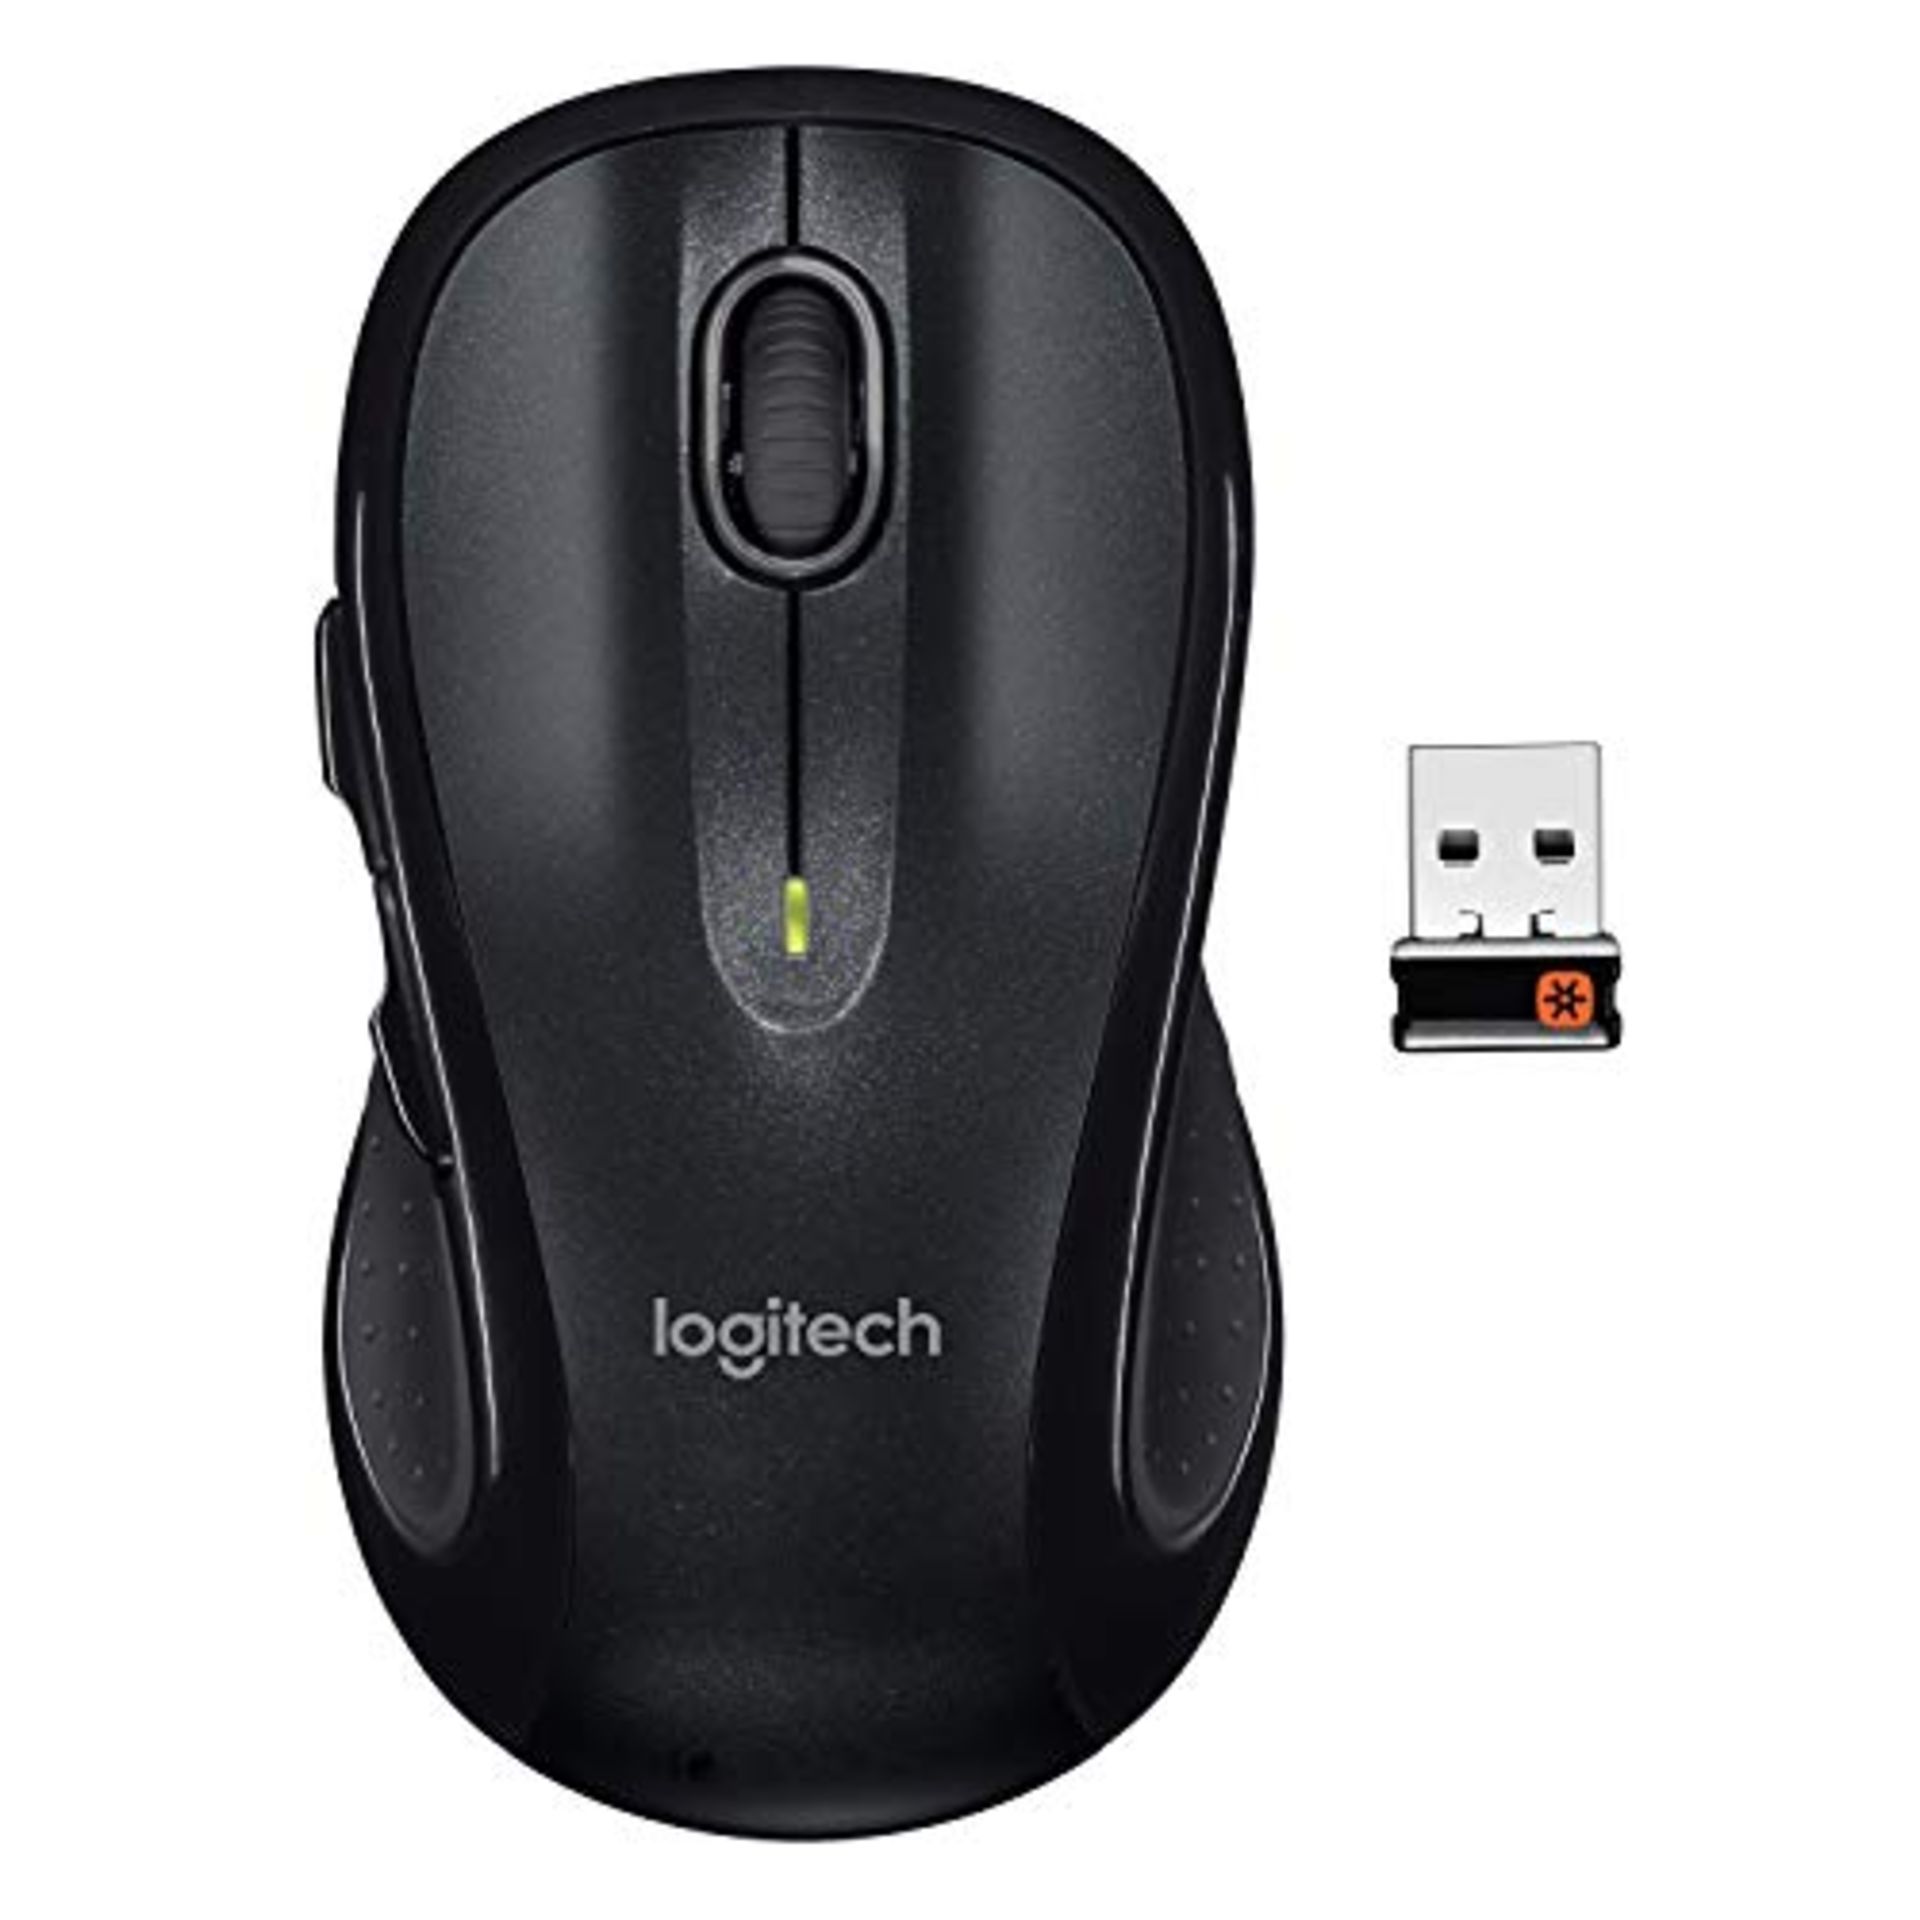 Logitech M510 Wireless Mouse, 2.4 GHz with USB Unifying receiver, 1000 DPI with laser